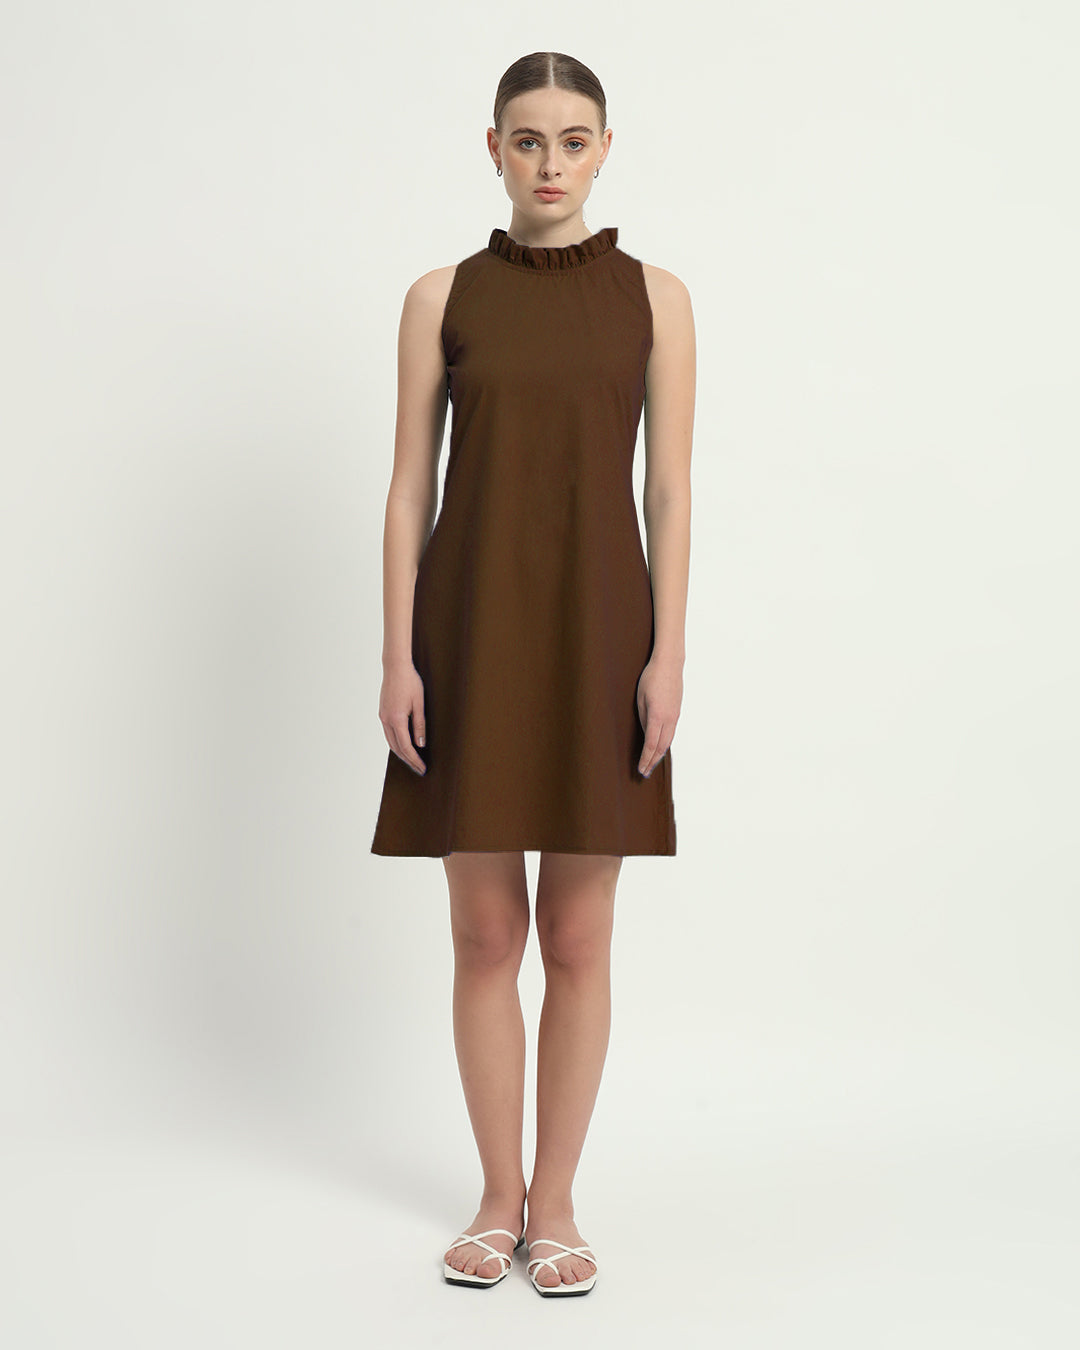 The Angelica Nutshell Cotton Dress